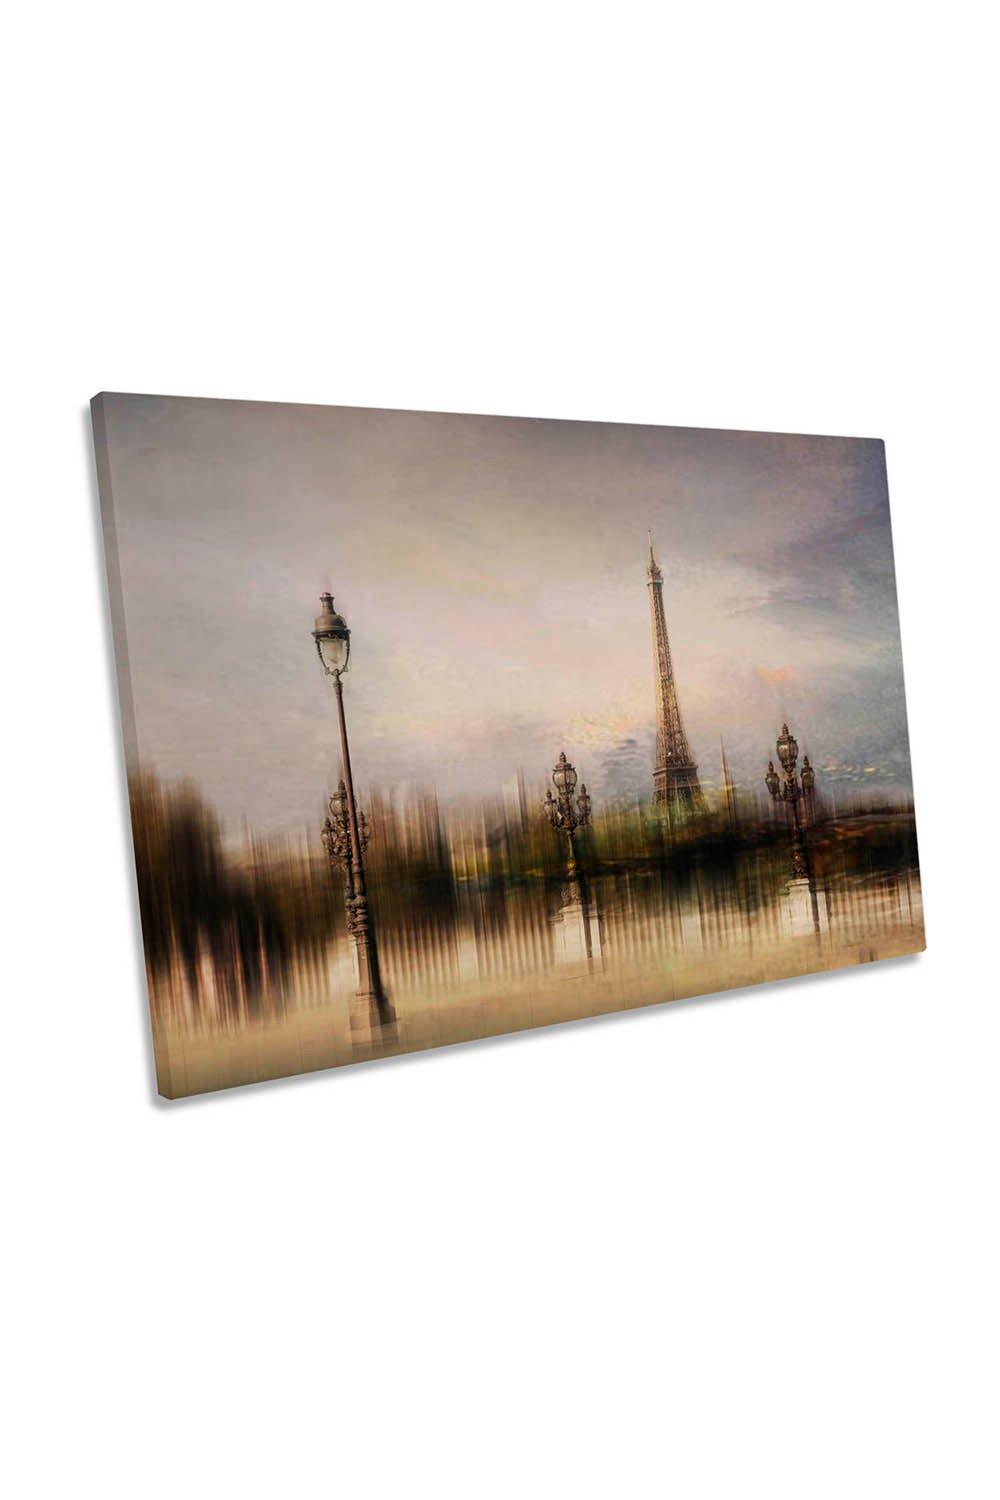 We will Always have Paris City Eiffel Tower Canvas Wall Art Picture Print